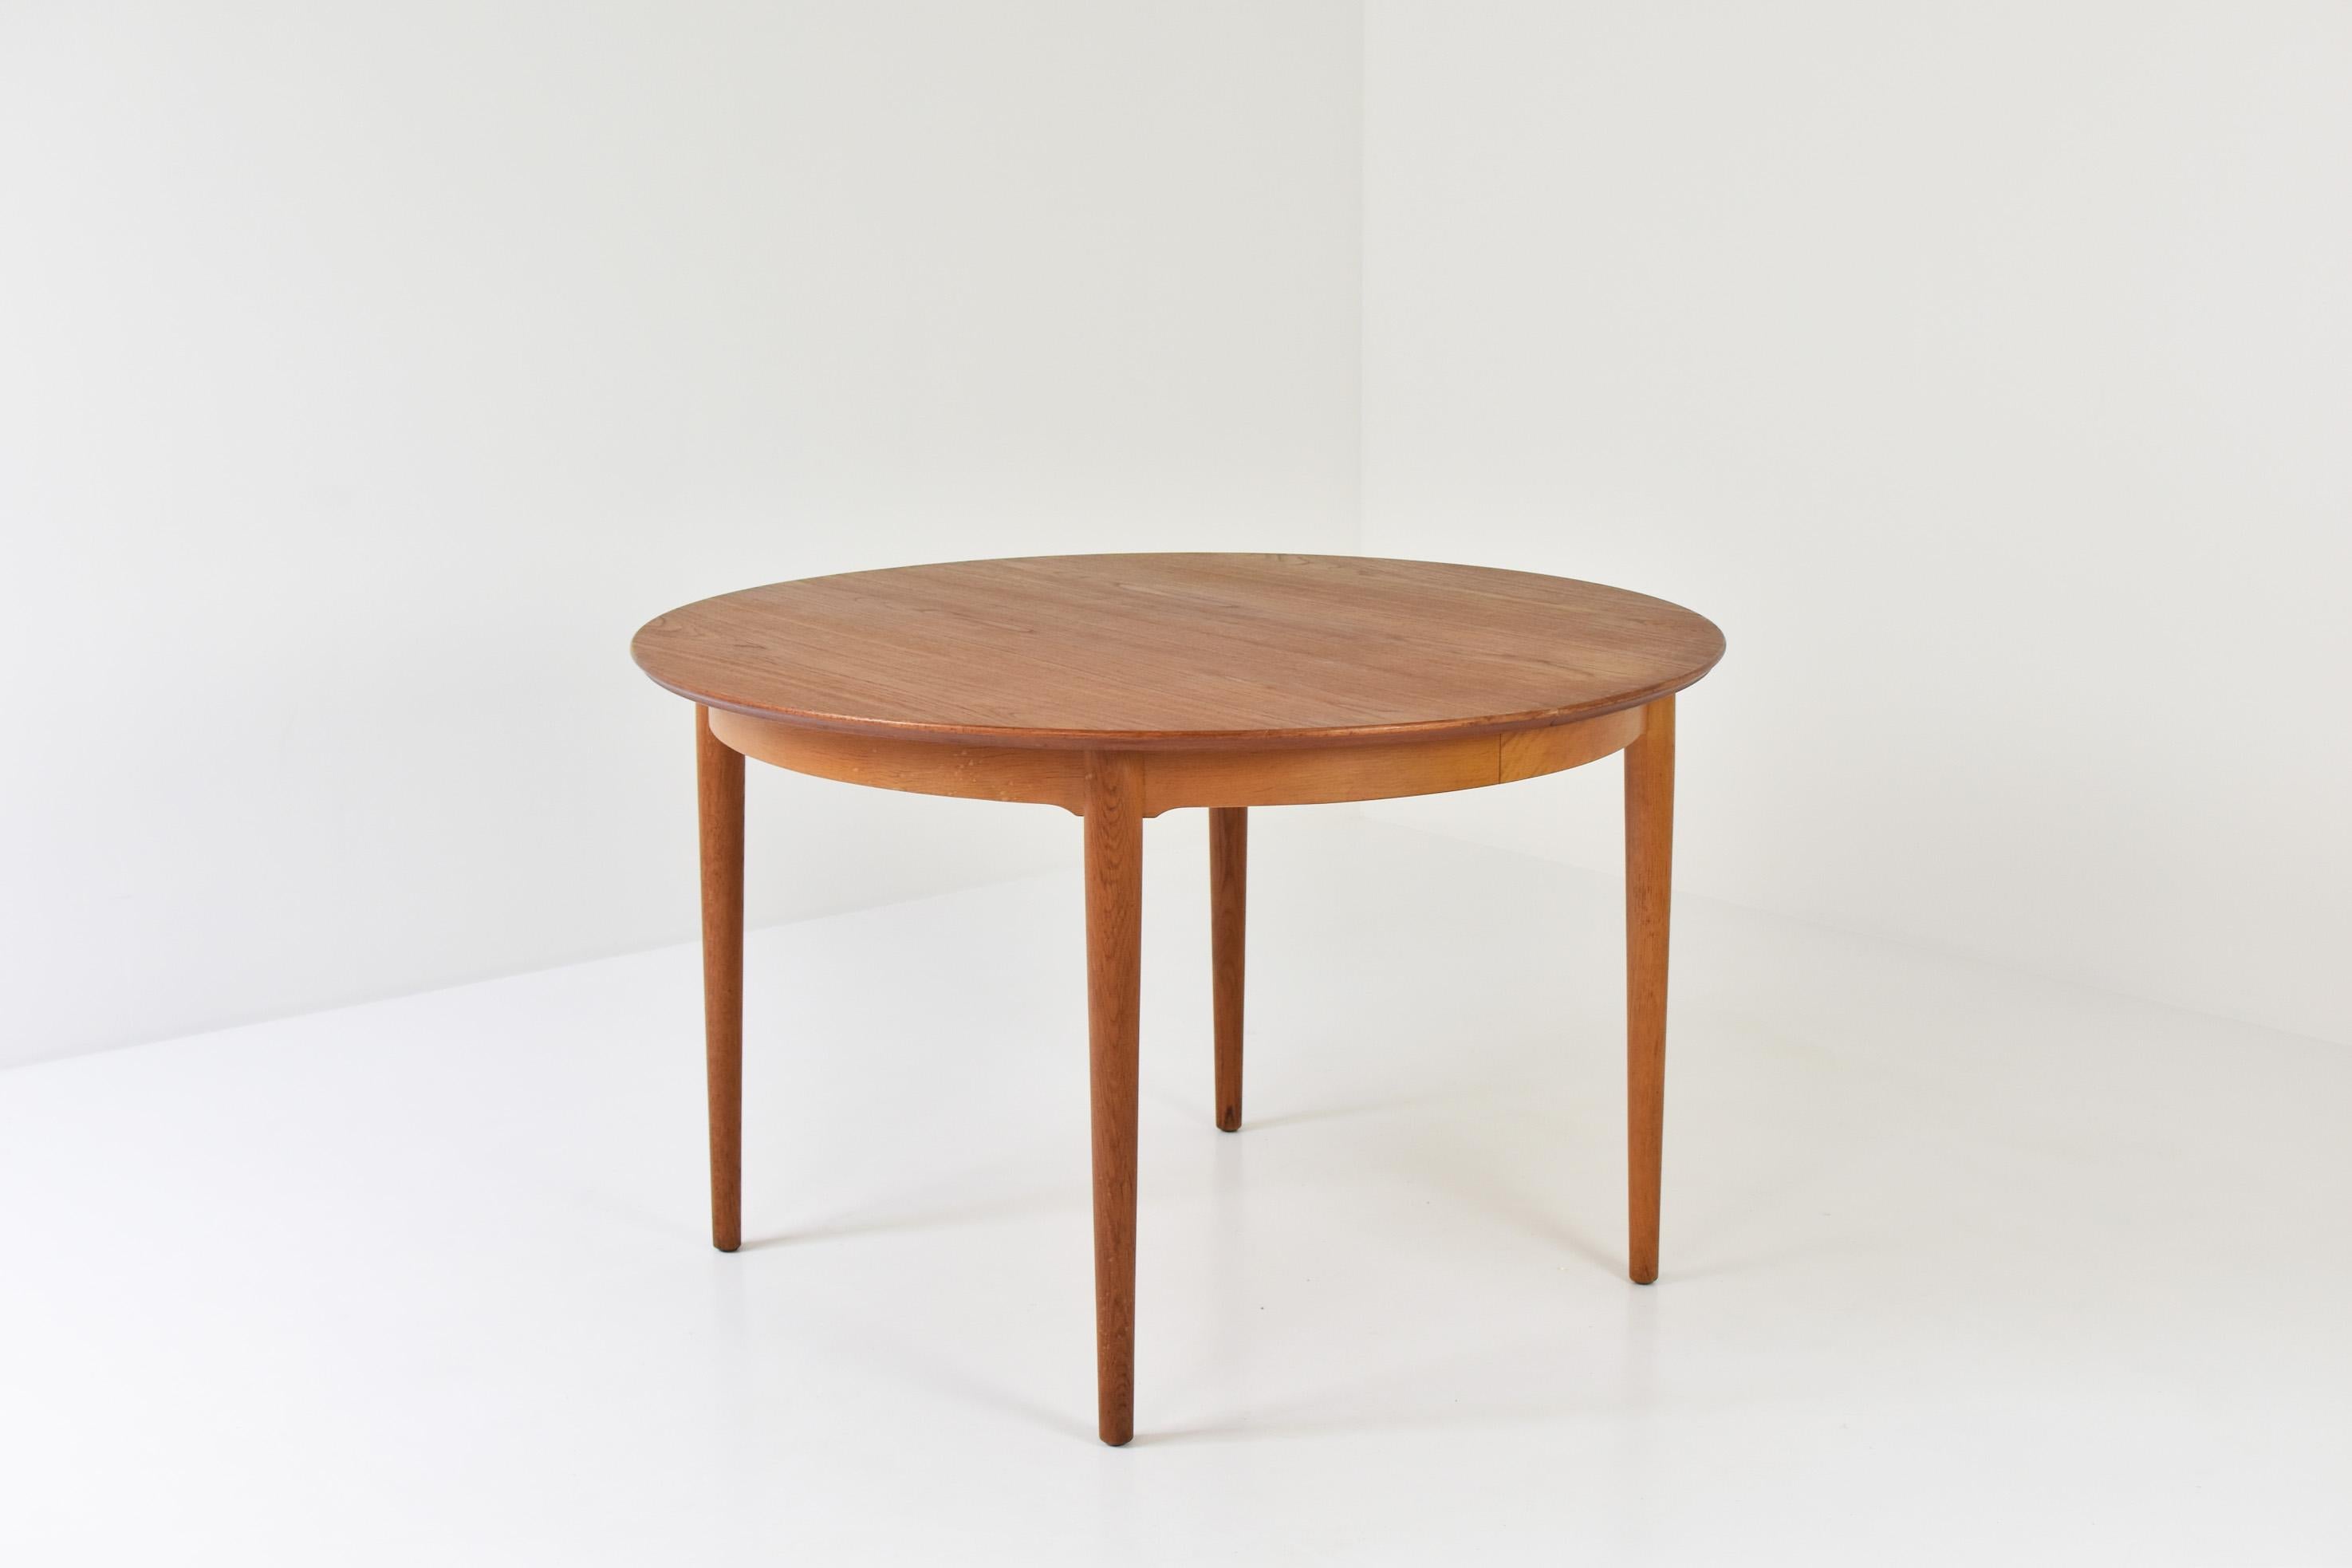 Elegant dining table designed by Arne Vodder for Sibast Mobler, Denmark, 1955. This is model no. 204 and features a solid oak base and teak veneered top.